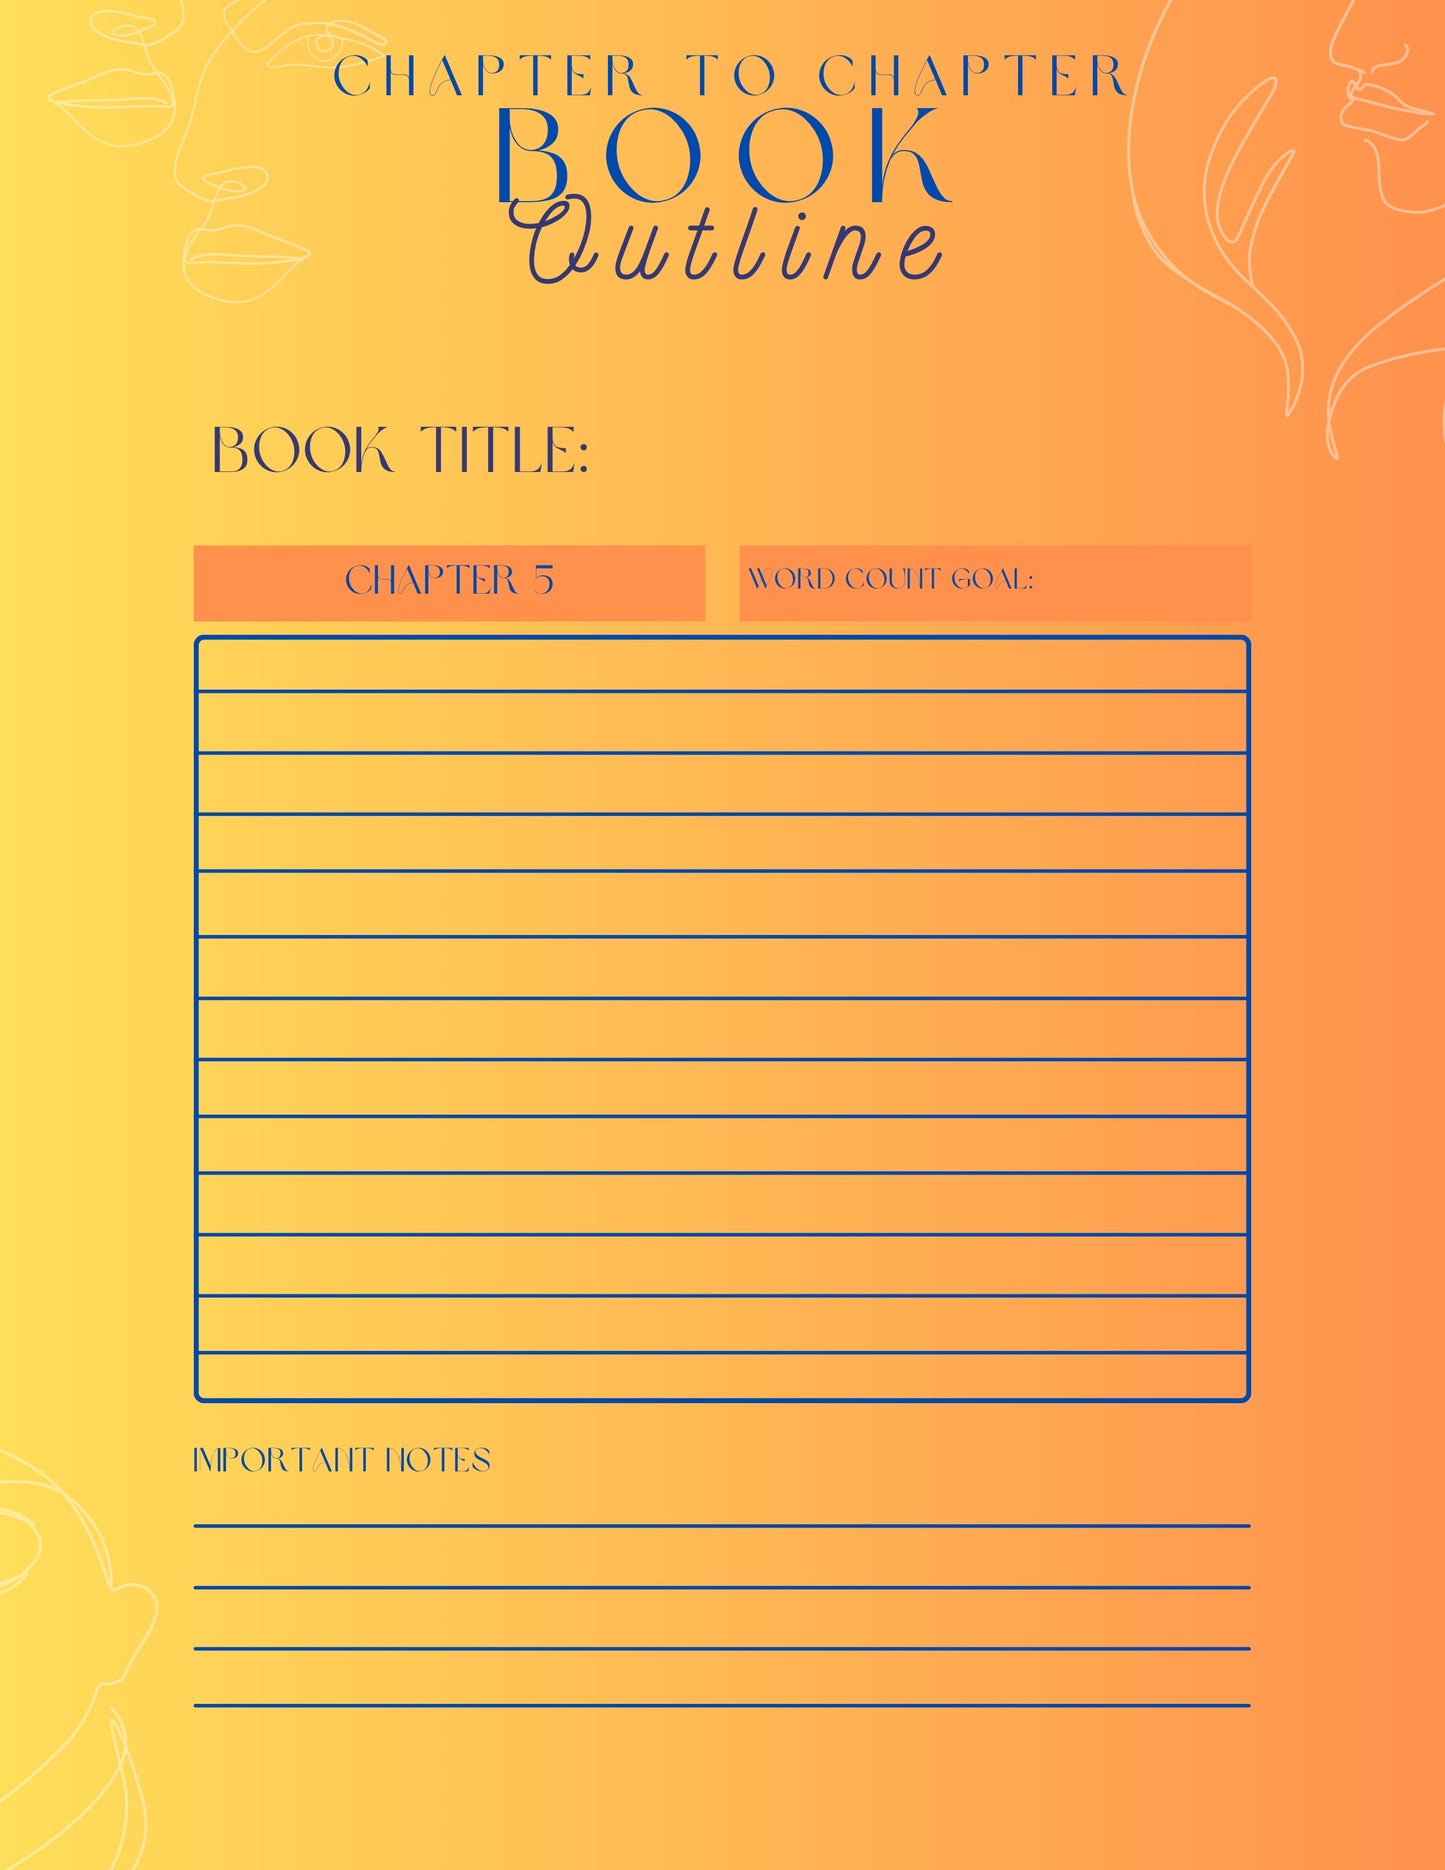 Chapter to Chapter Outline Template